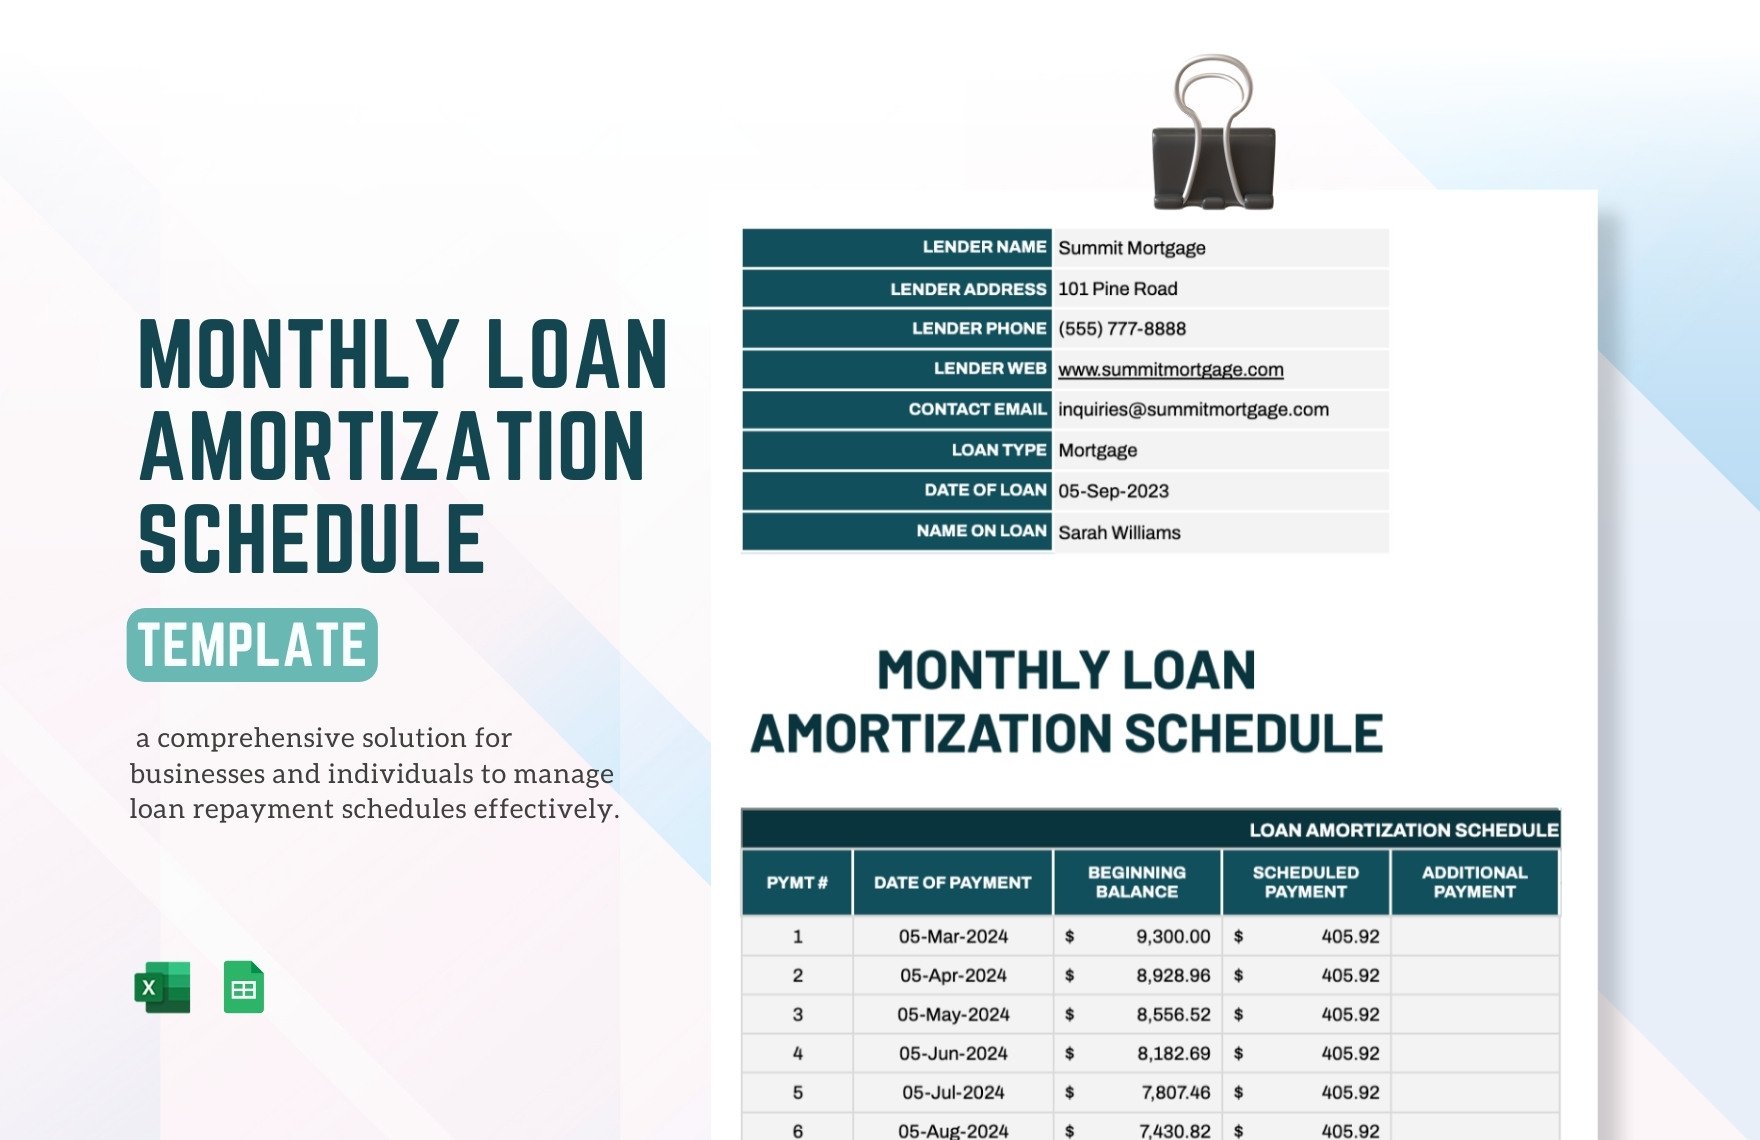 Monthly Loan Amortization Schedule Template in Excel, Google Sheets